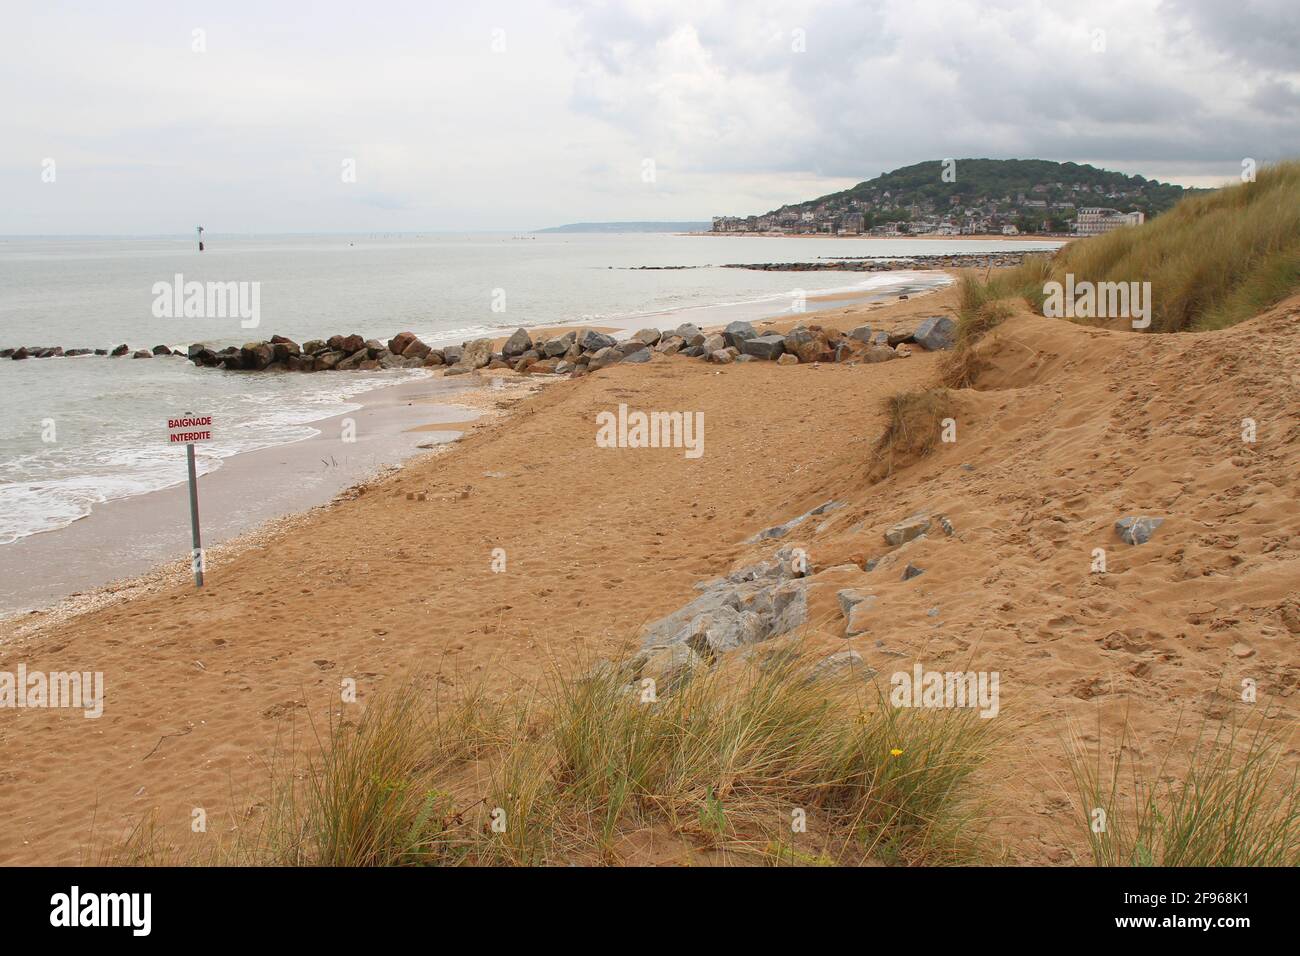 in cabourg in normandy (france) Stock Photo